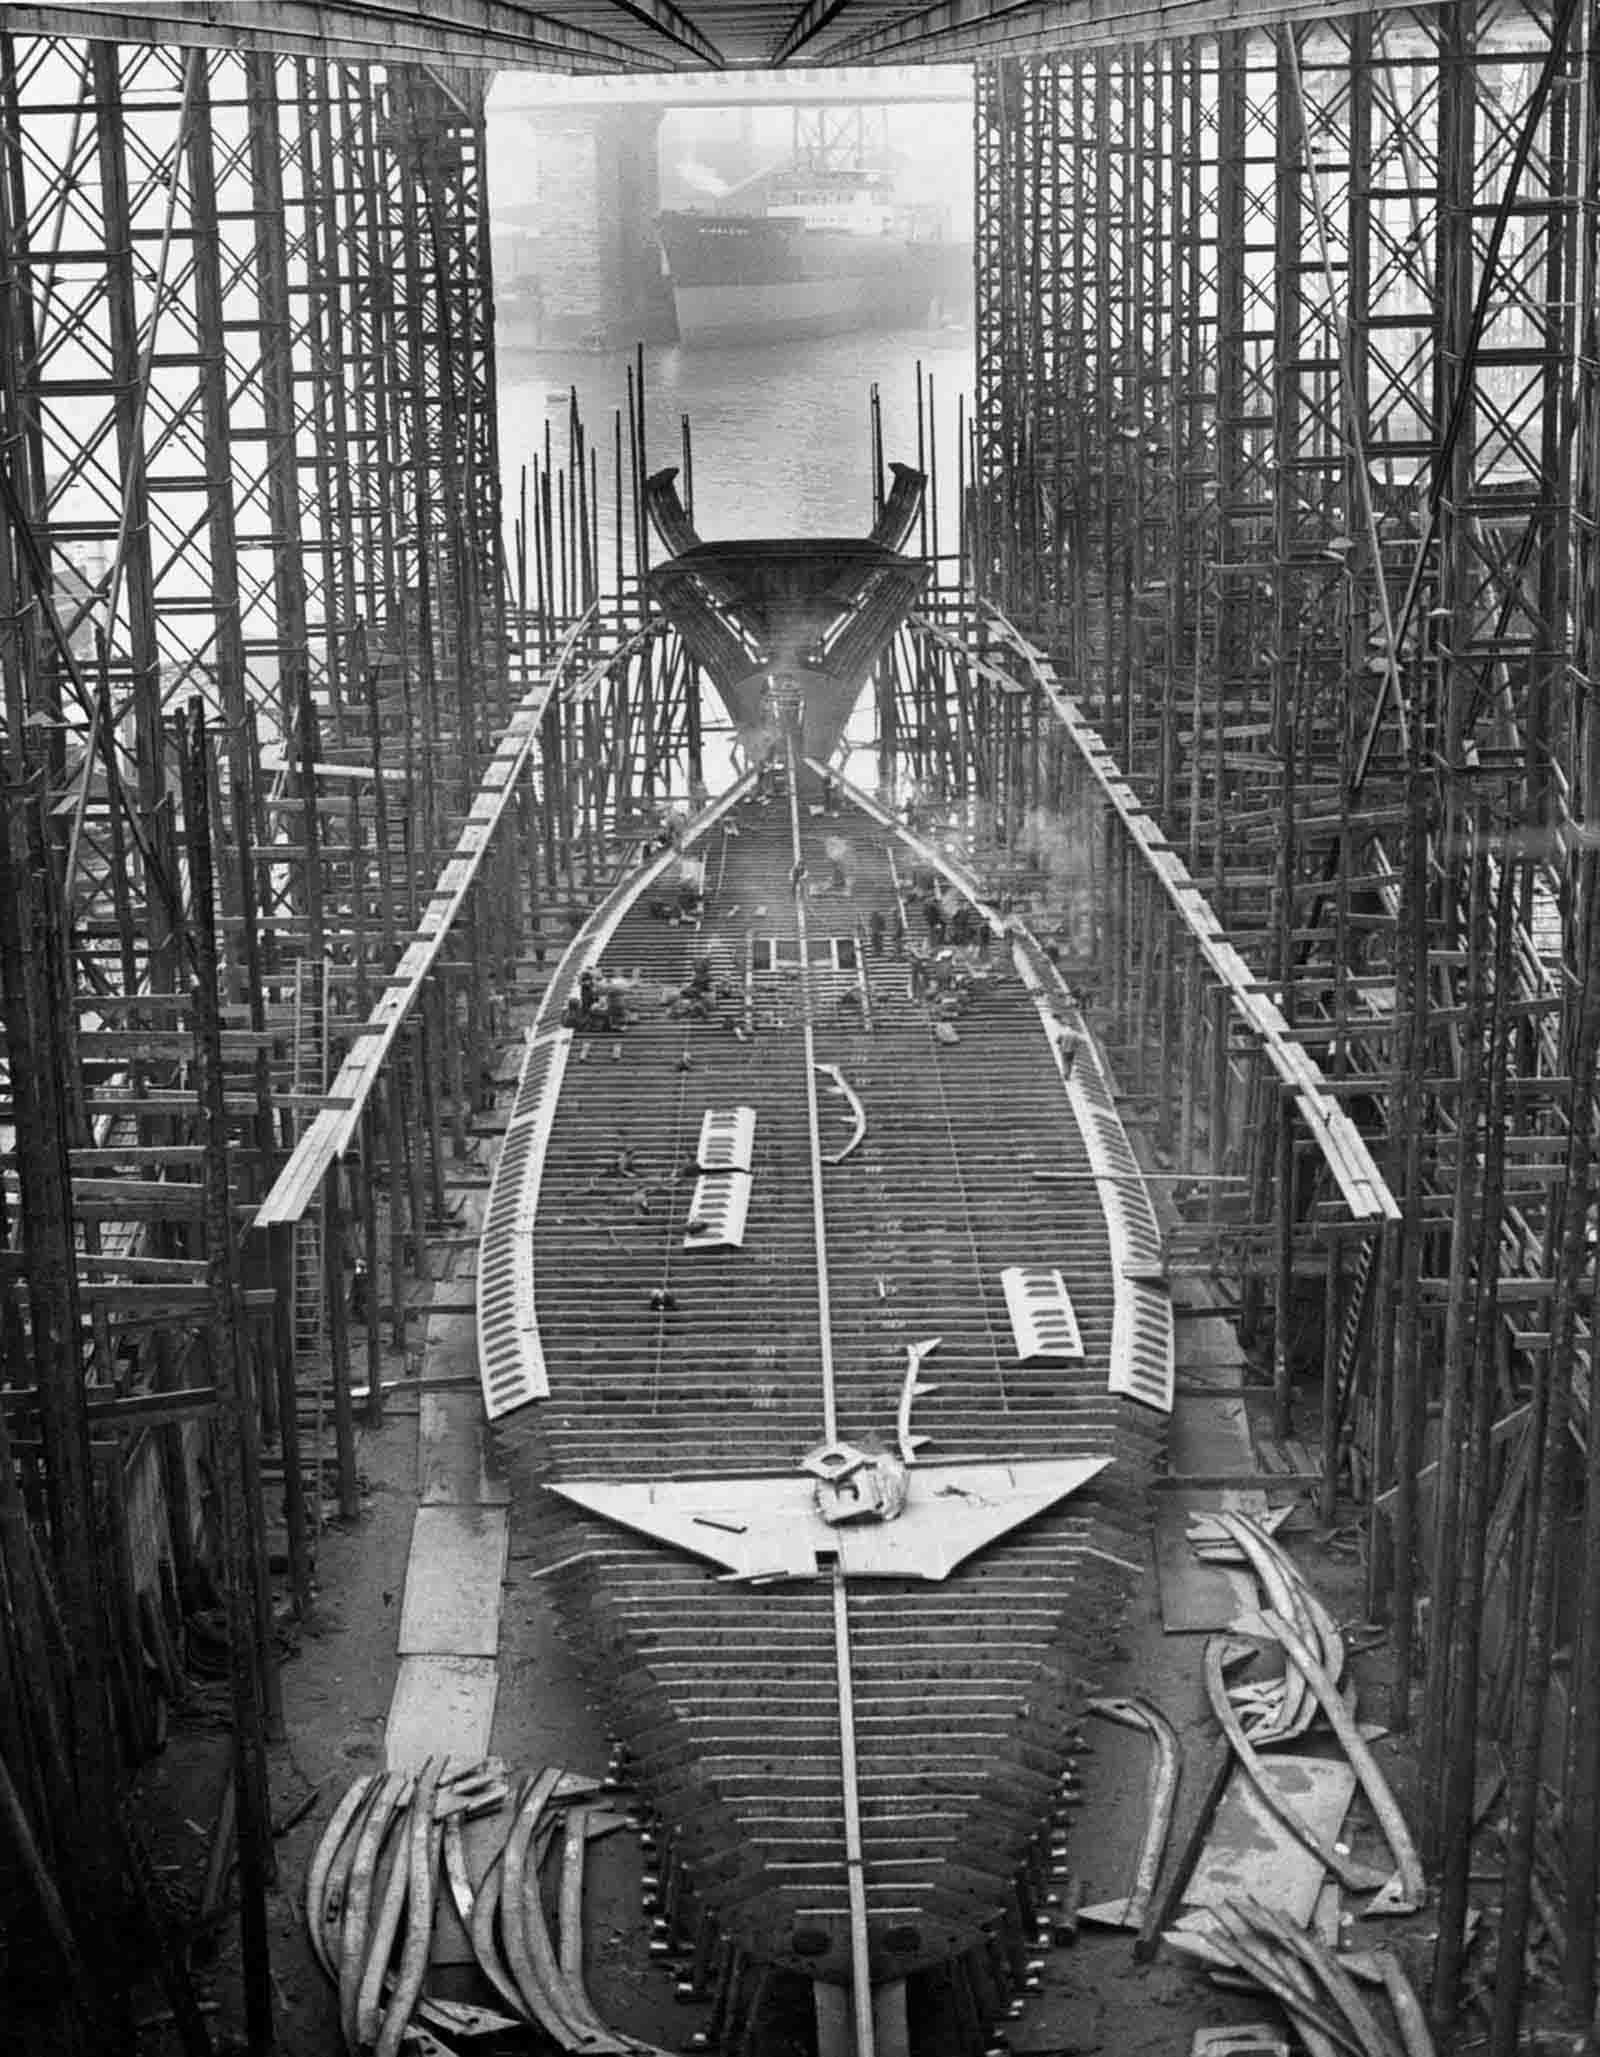 A ship under construction in London, 1900.